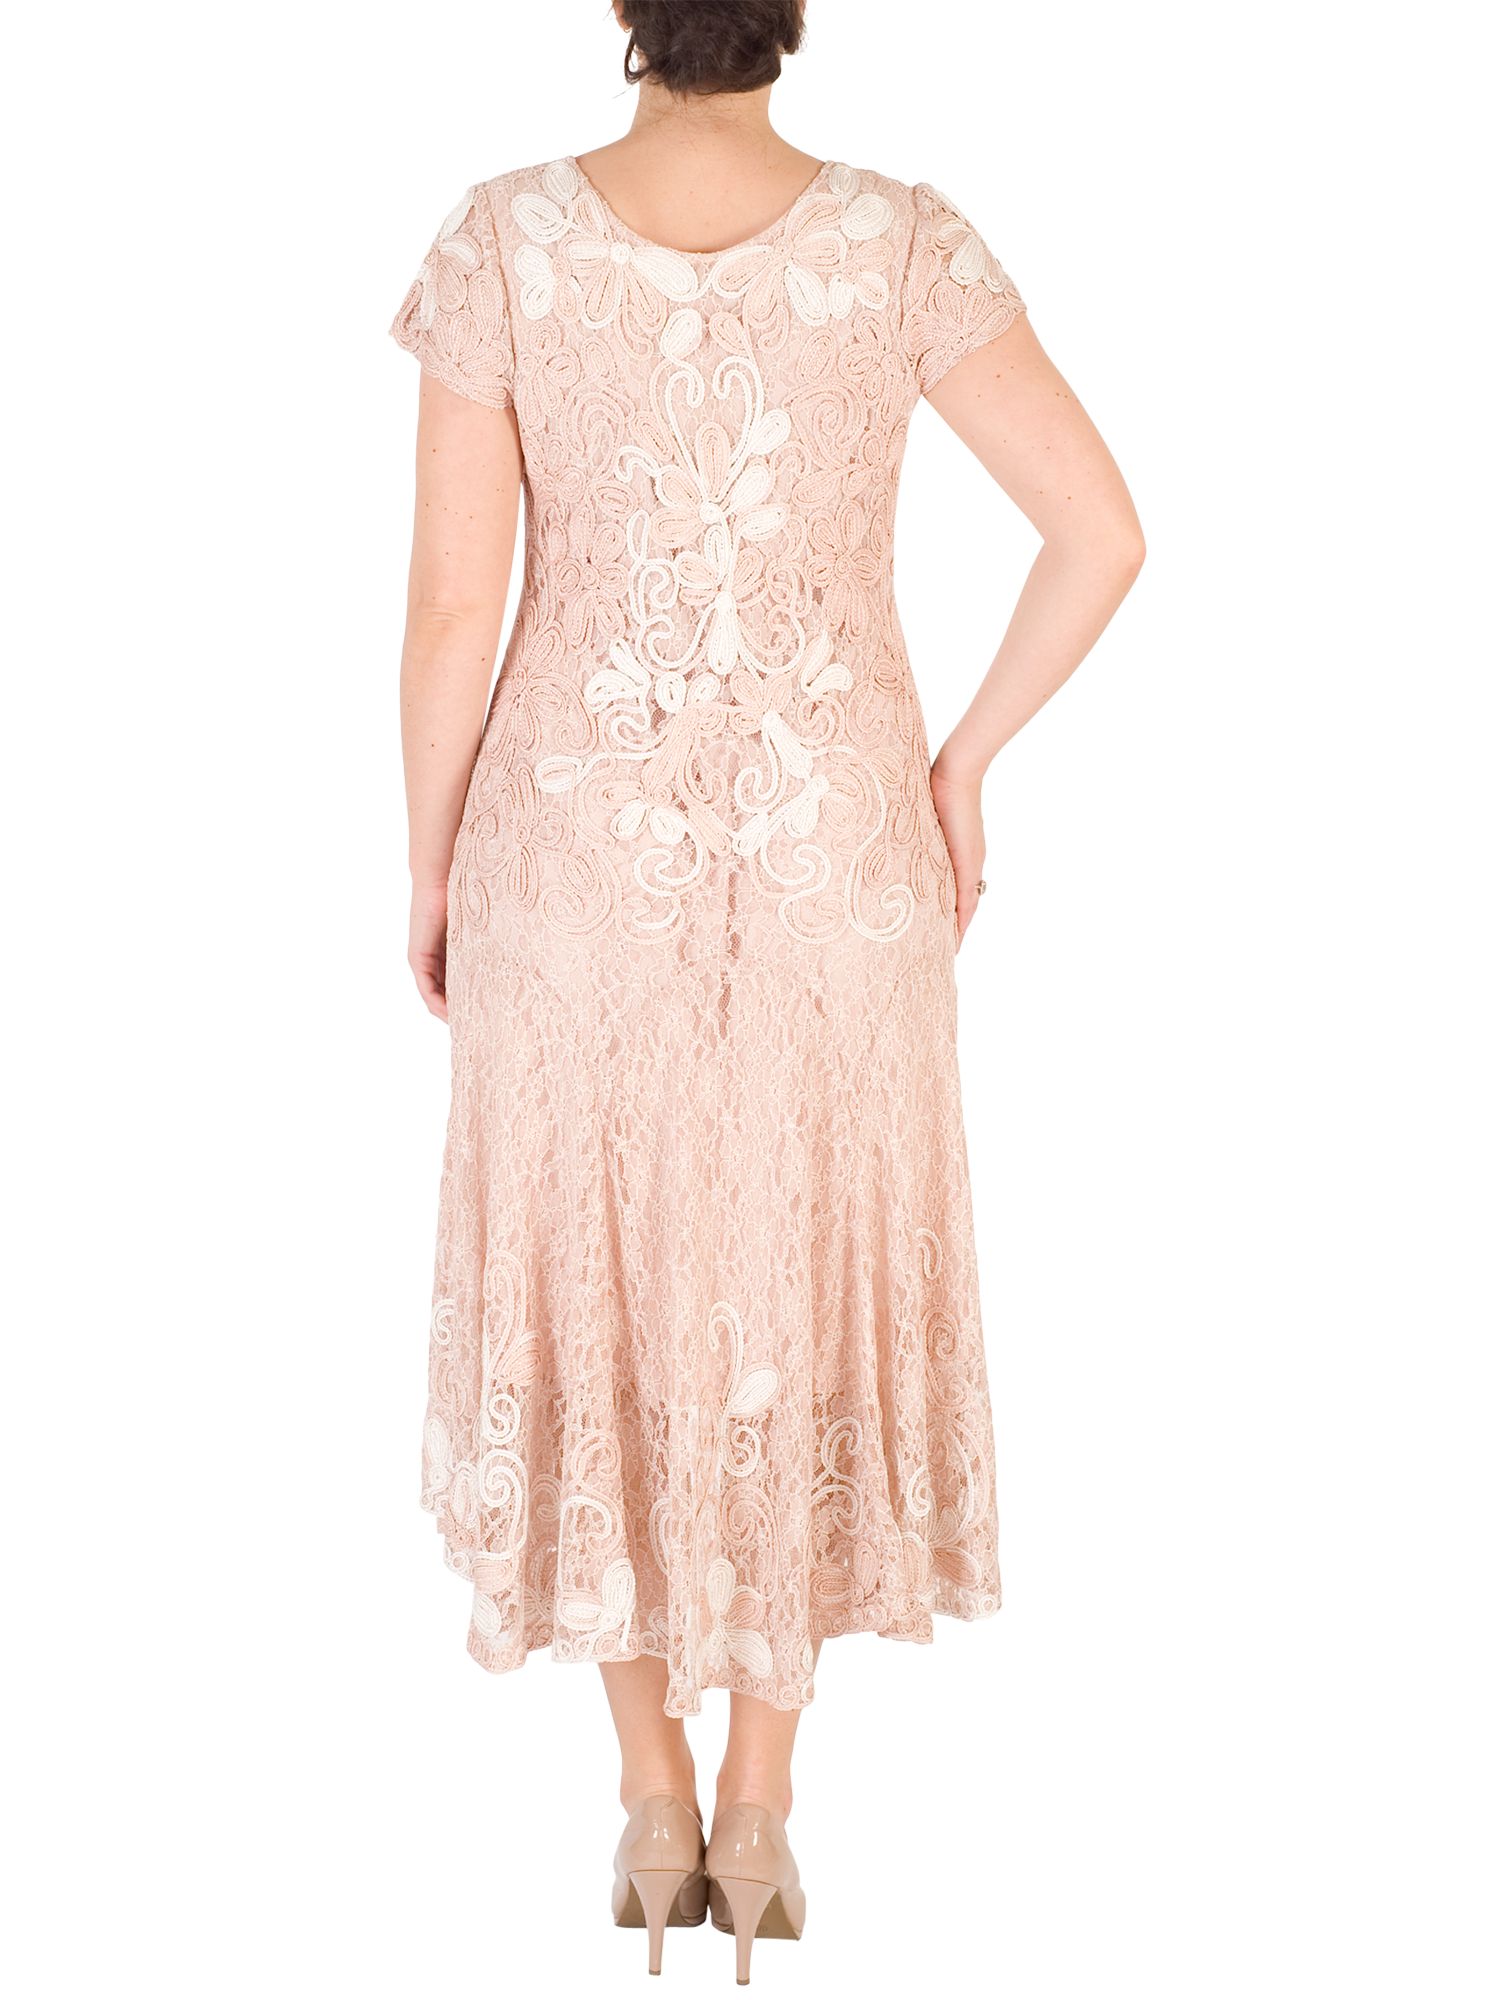 Chesca Ombre Cornelli Lace Dress, Blush/Ivory at John Lewis & Partners